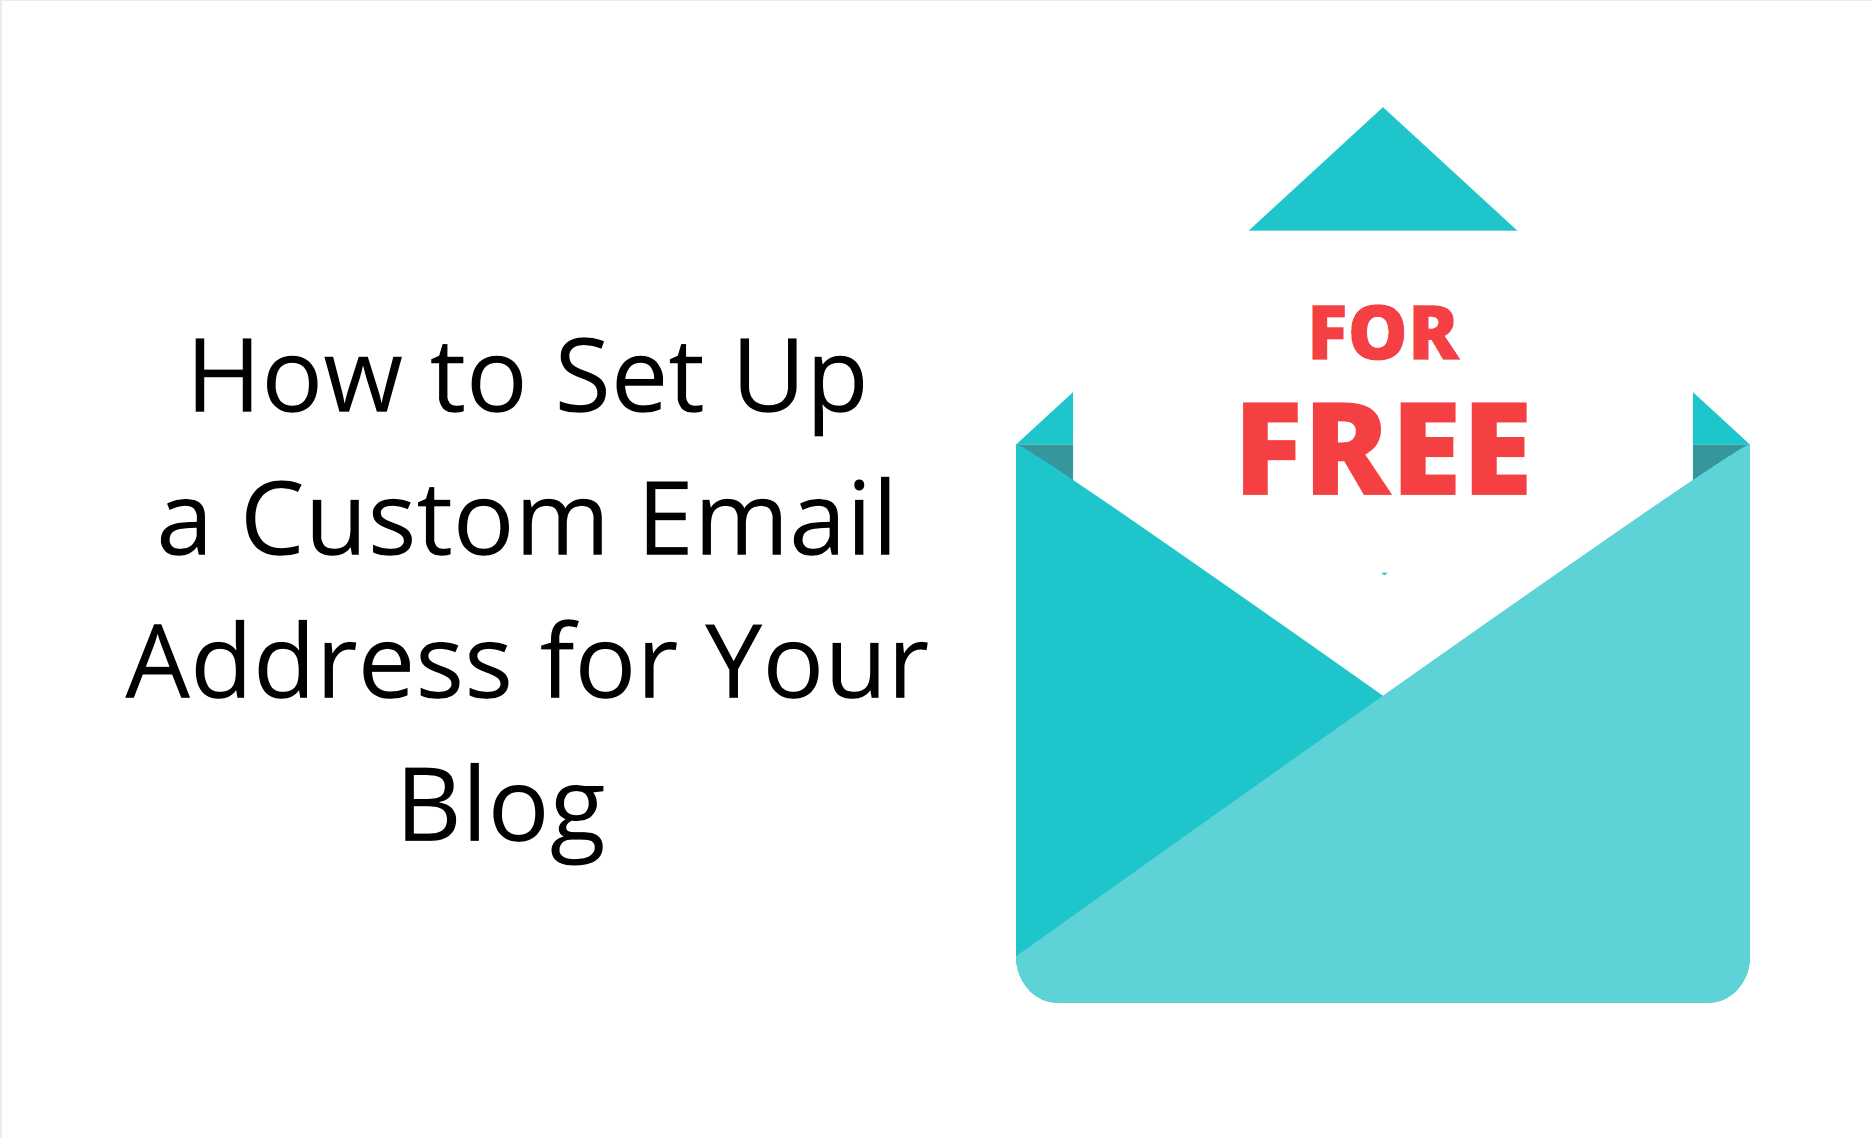 How to Set Up a Custom Email Address for Your Blog for FREE | Starting